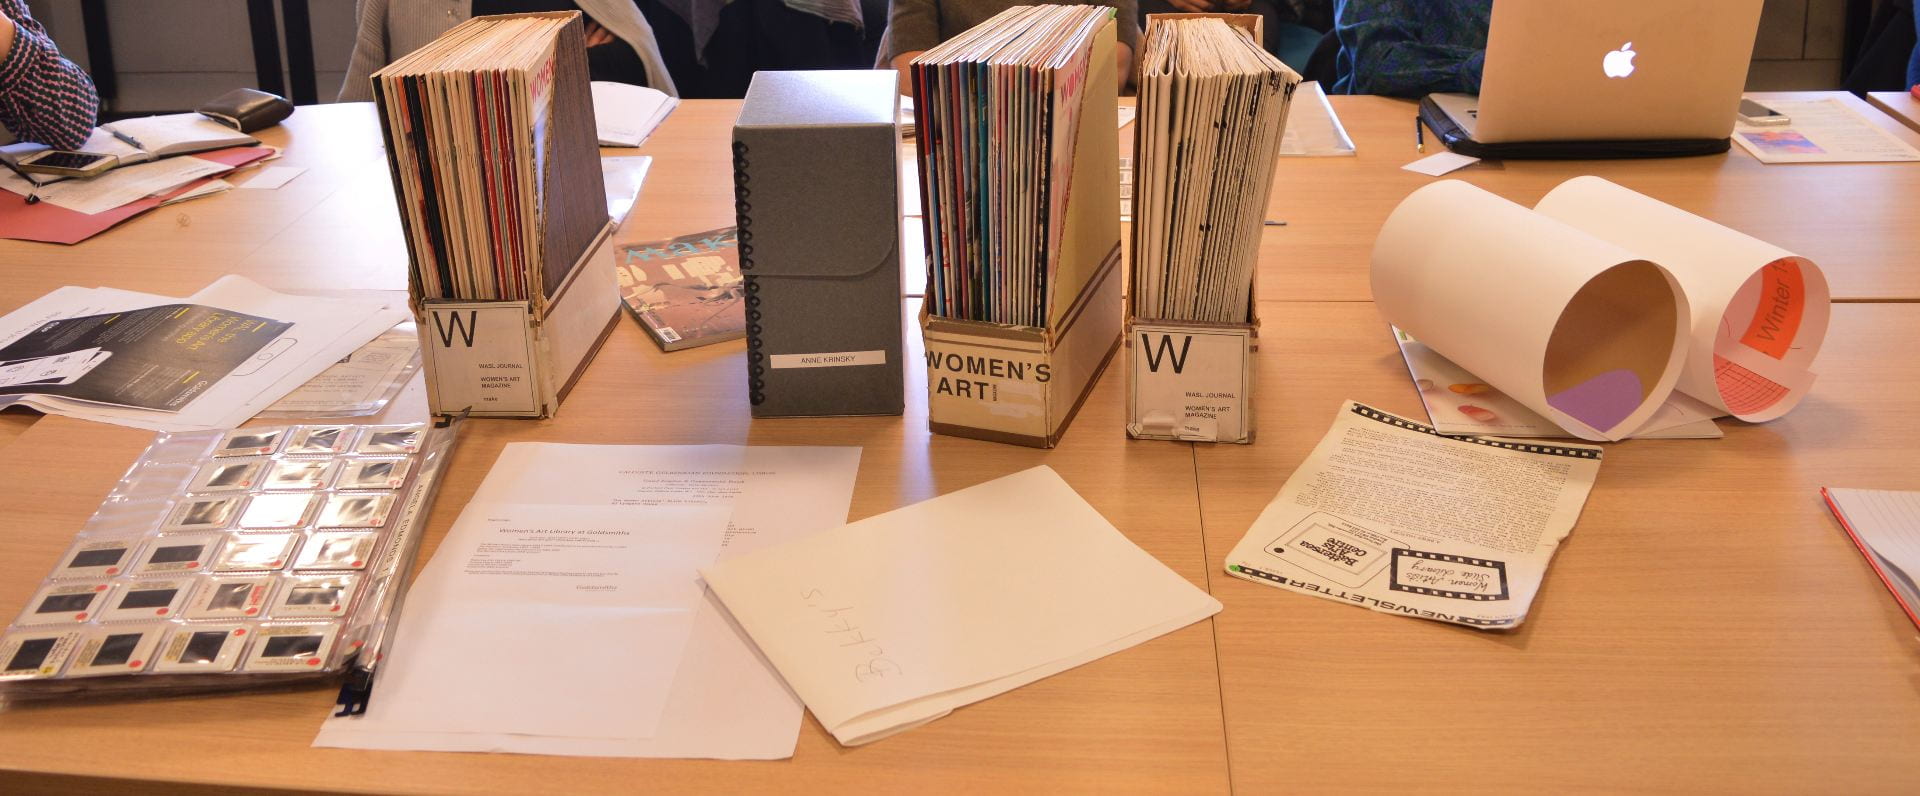 Archival material, slide files and art magazines on a table